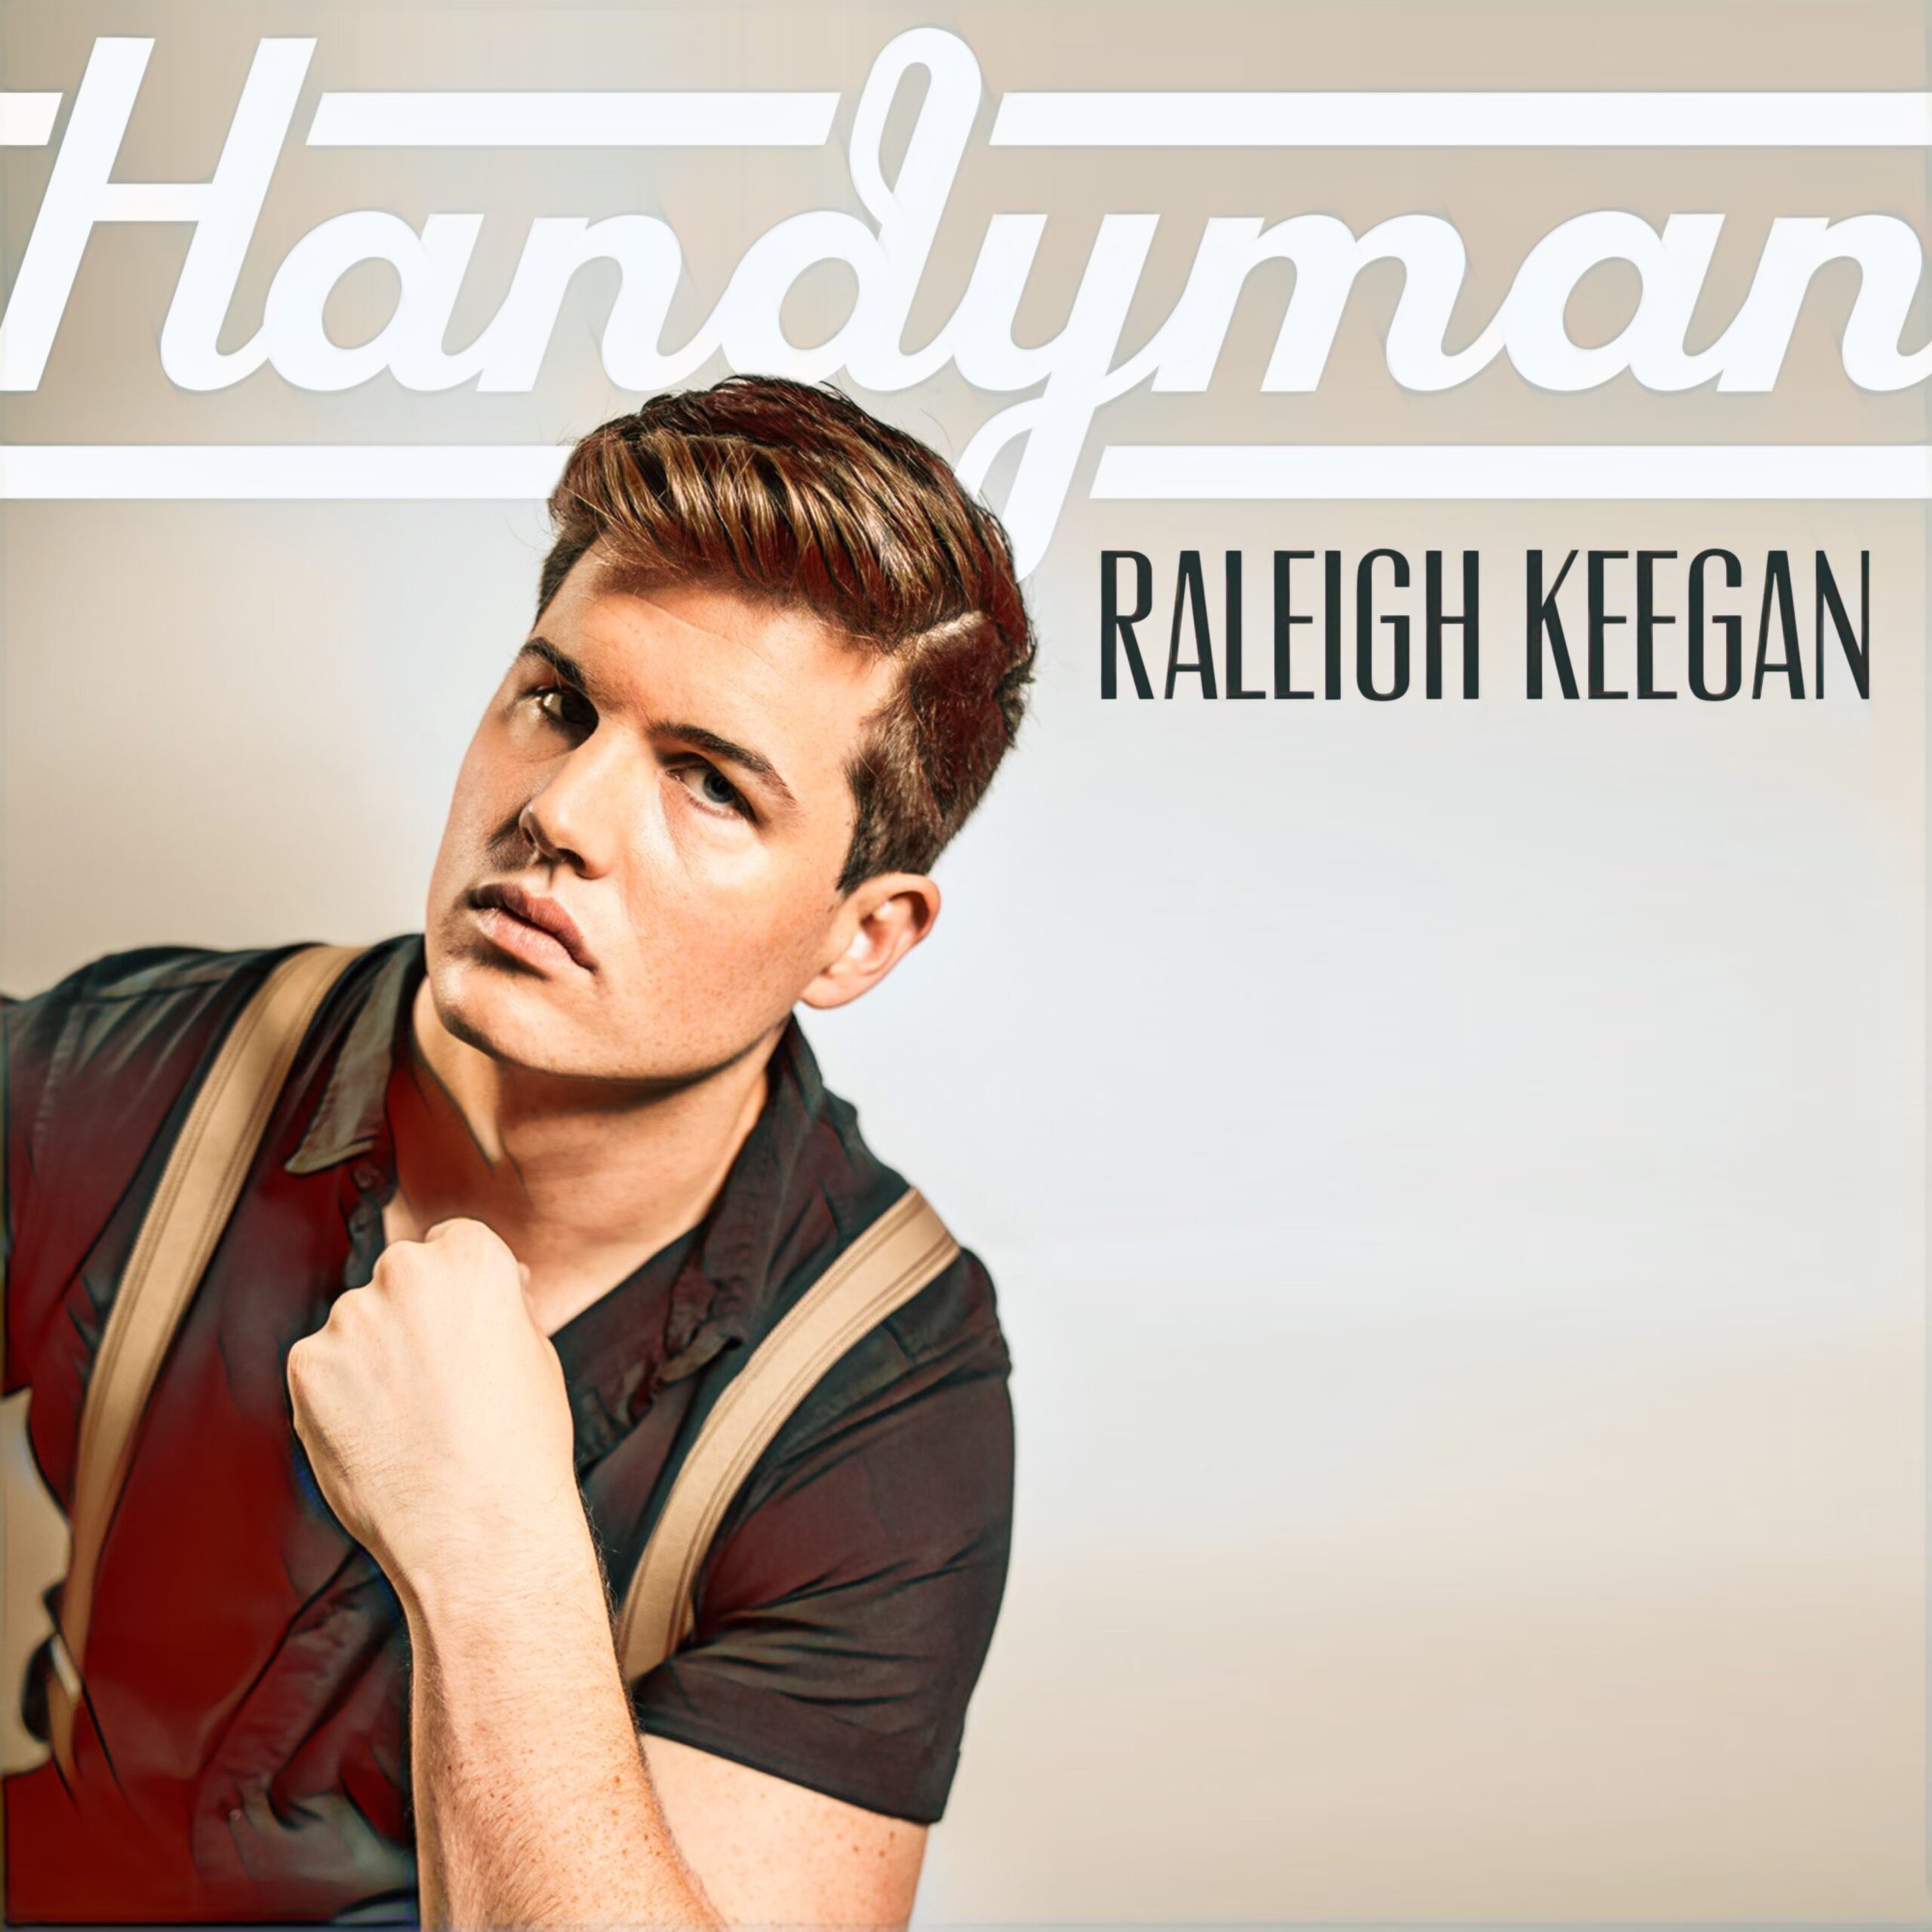 Raleigh Keegan Offers A Helping Hand With New Single “Handyman” – Exclusive